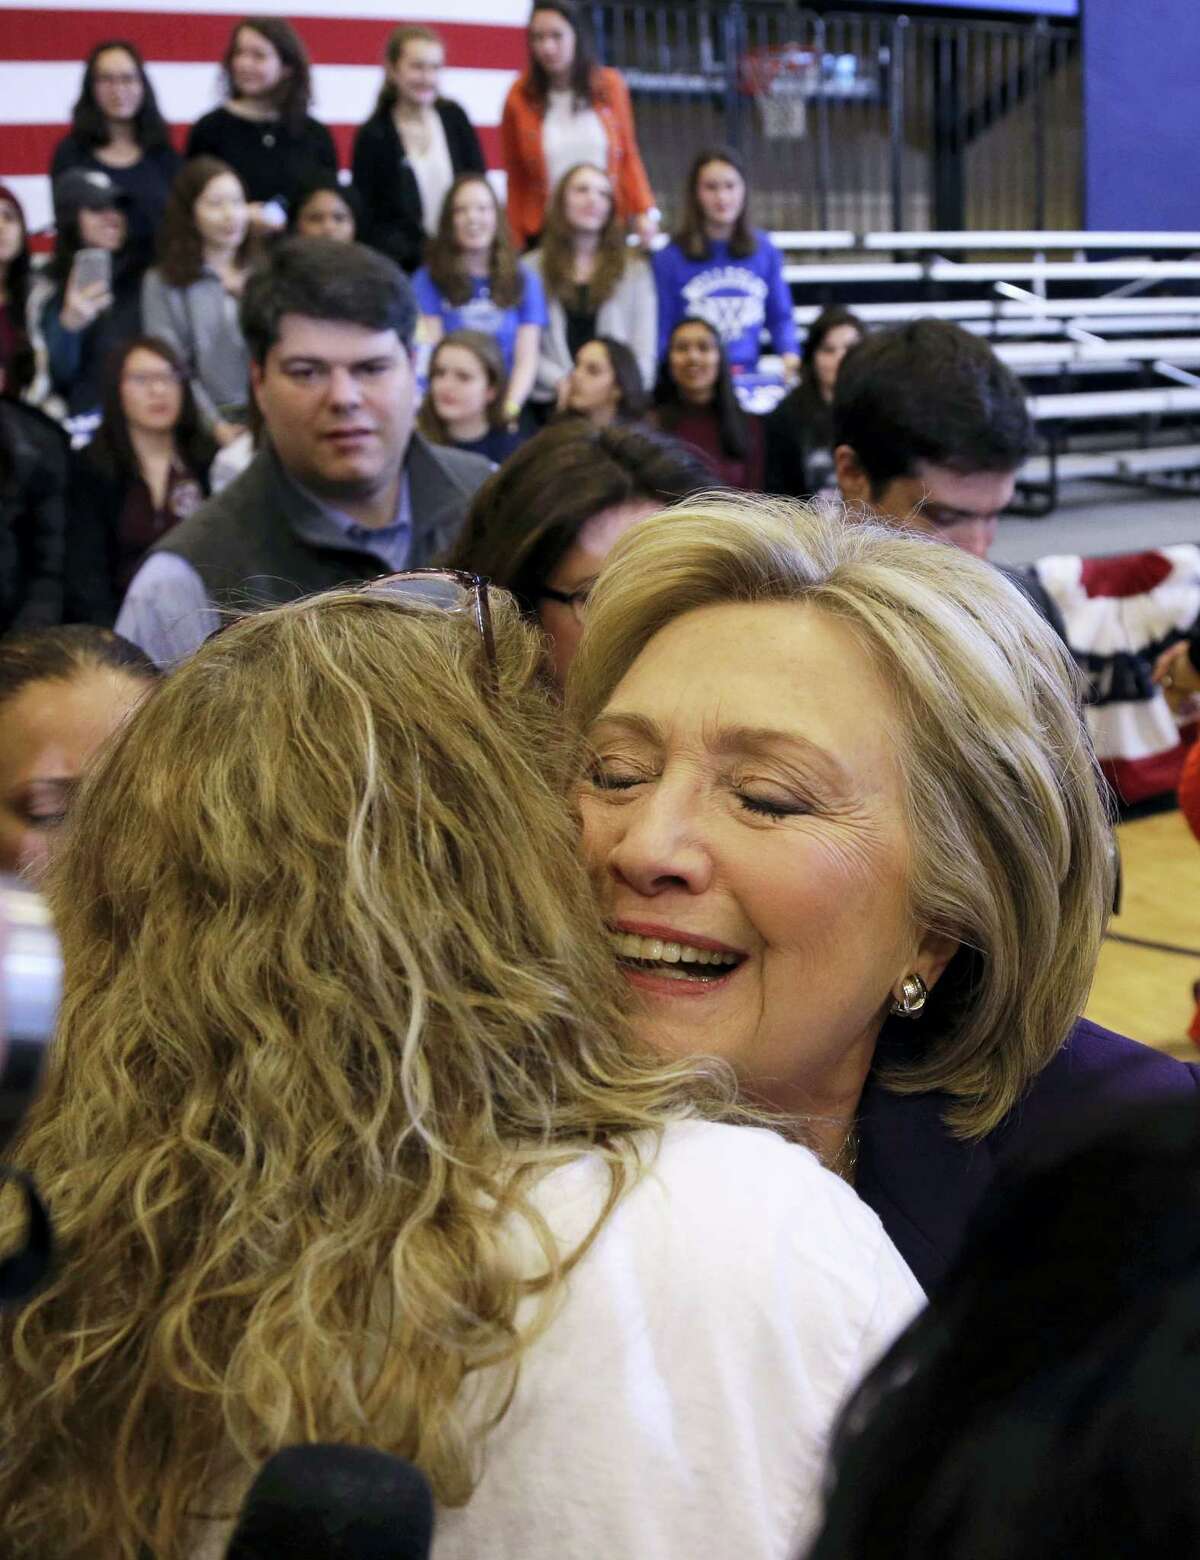 Democratic presidential candidate Hillary Clinton hugs a supporter at a campaign event, Tuesday, Feb. 2, 2016, in Nashua, N.H.